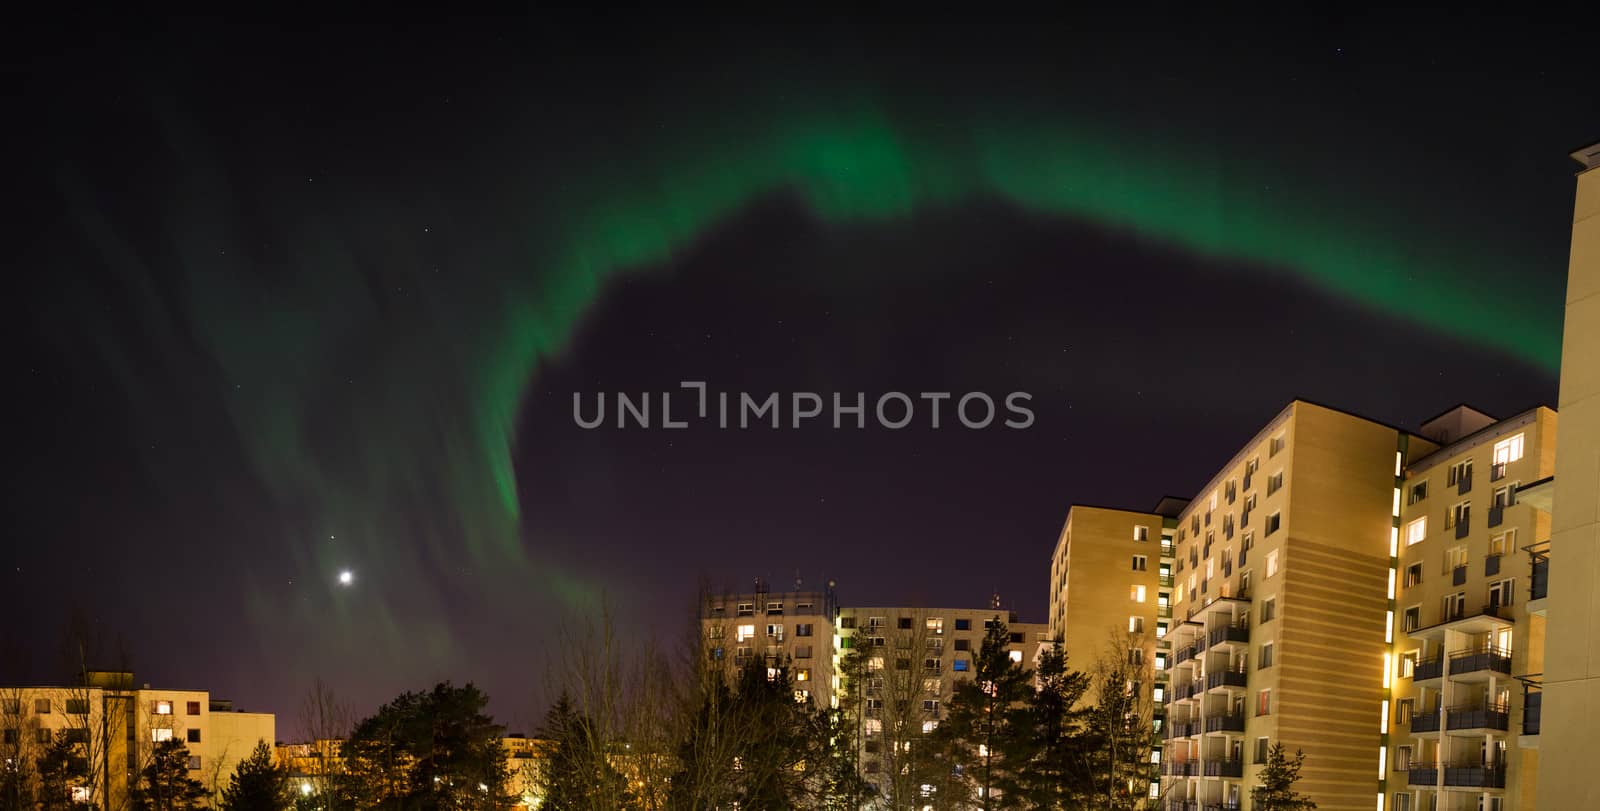 Green aurora borealis over city buildings by juhku